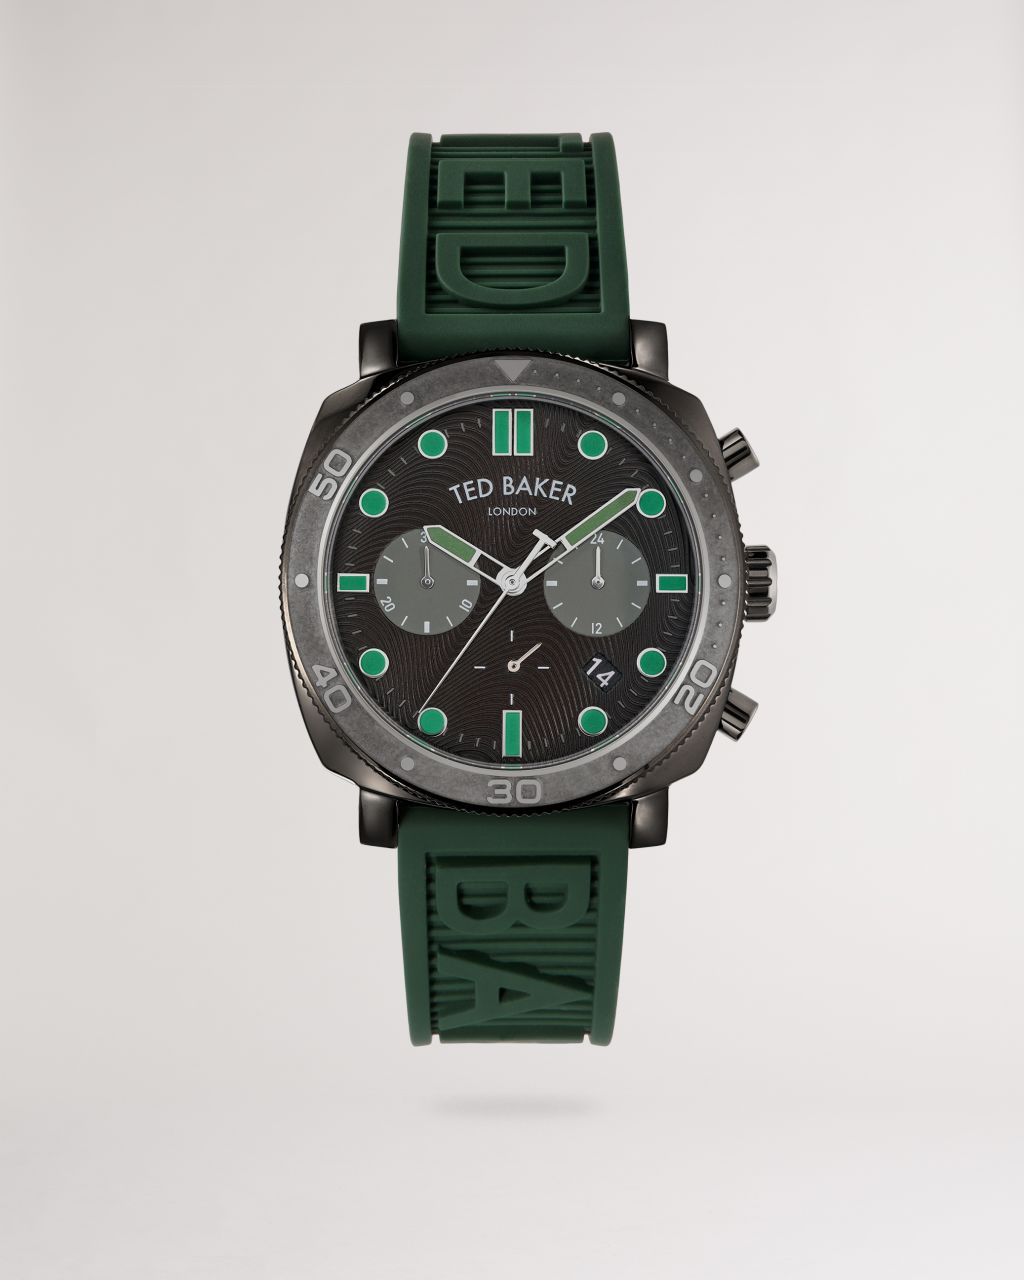 Ted Baker Silicone Strap Watch in Green RBBER, Men's Accessories